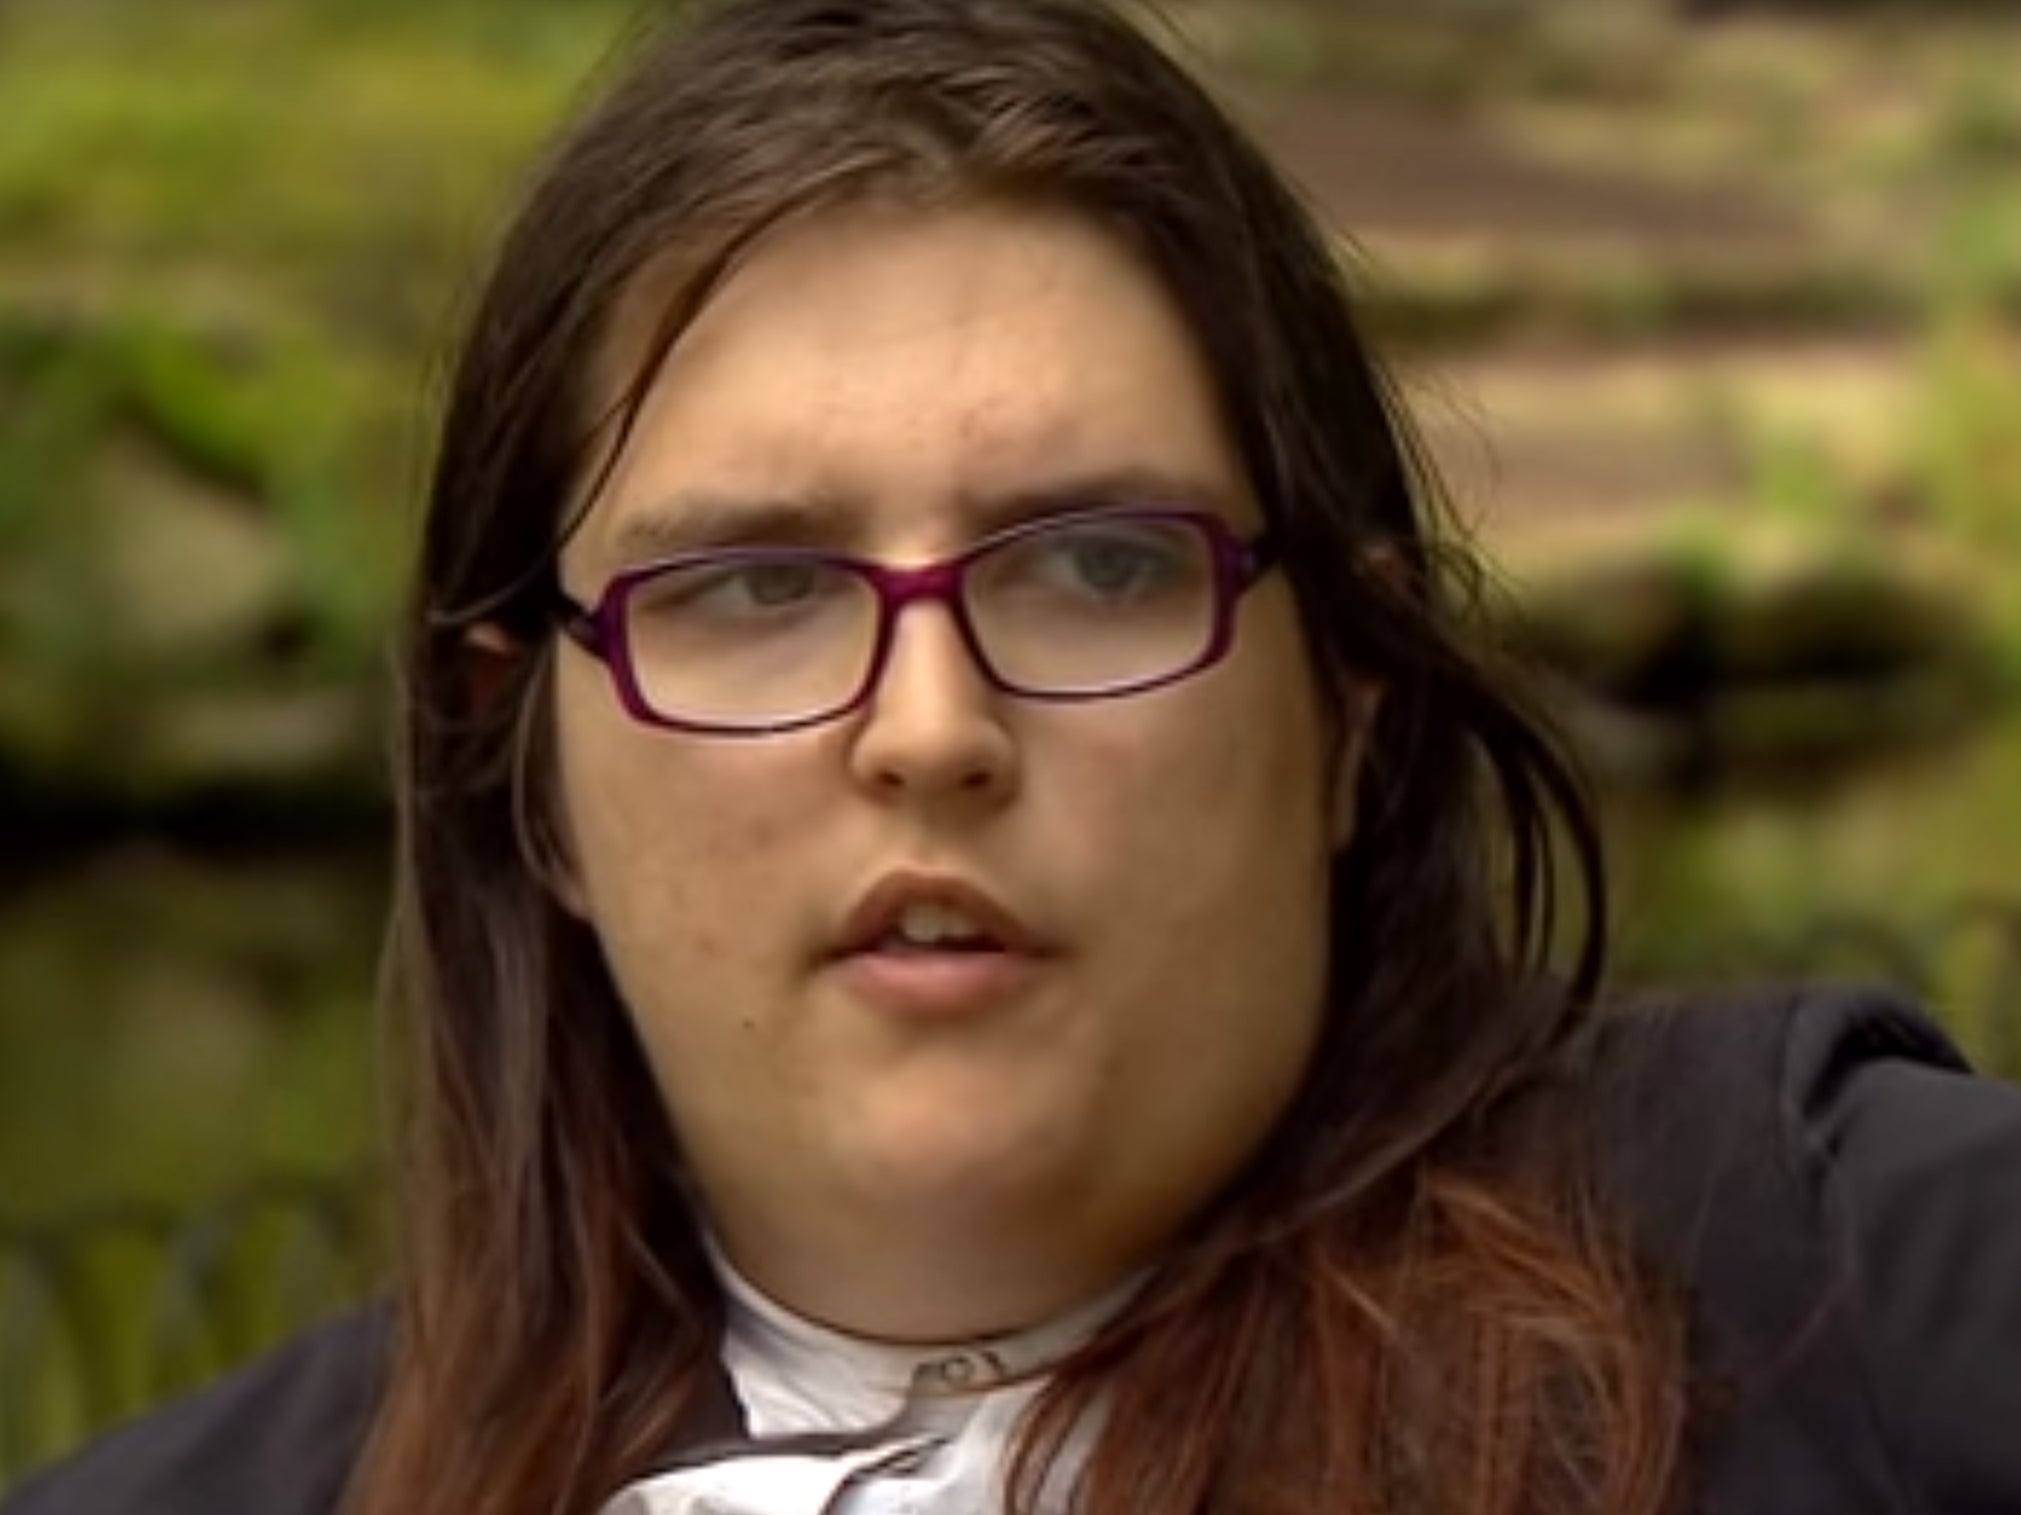 Aimee Challenor served as the Green Party’s equality spokeswoman